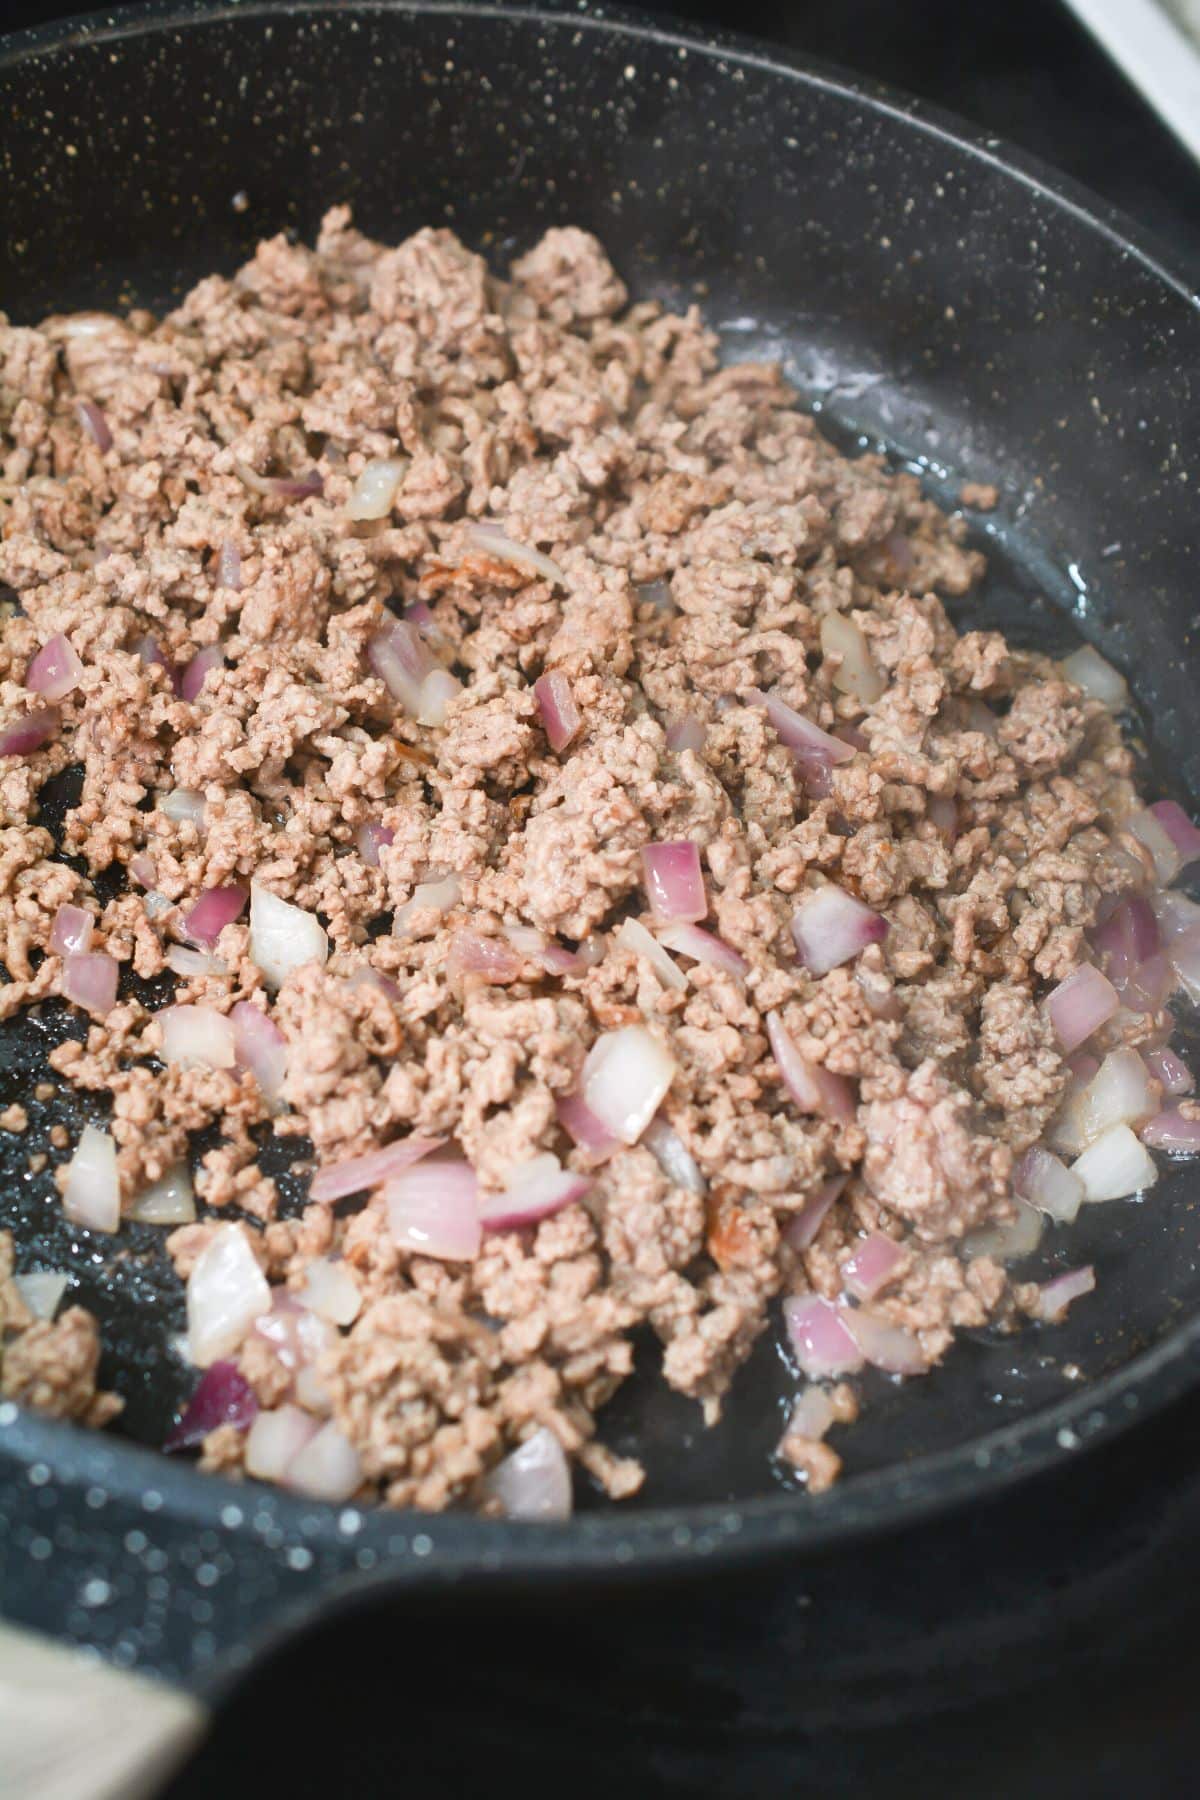 Ground beef and onions are being sautéed in the skillet.